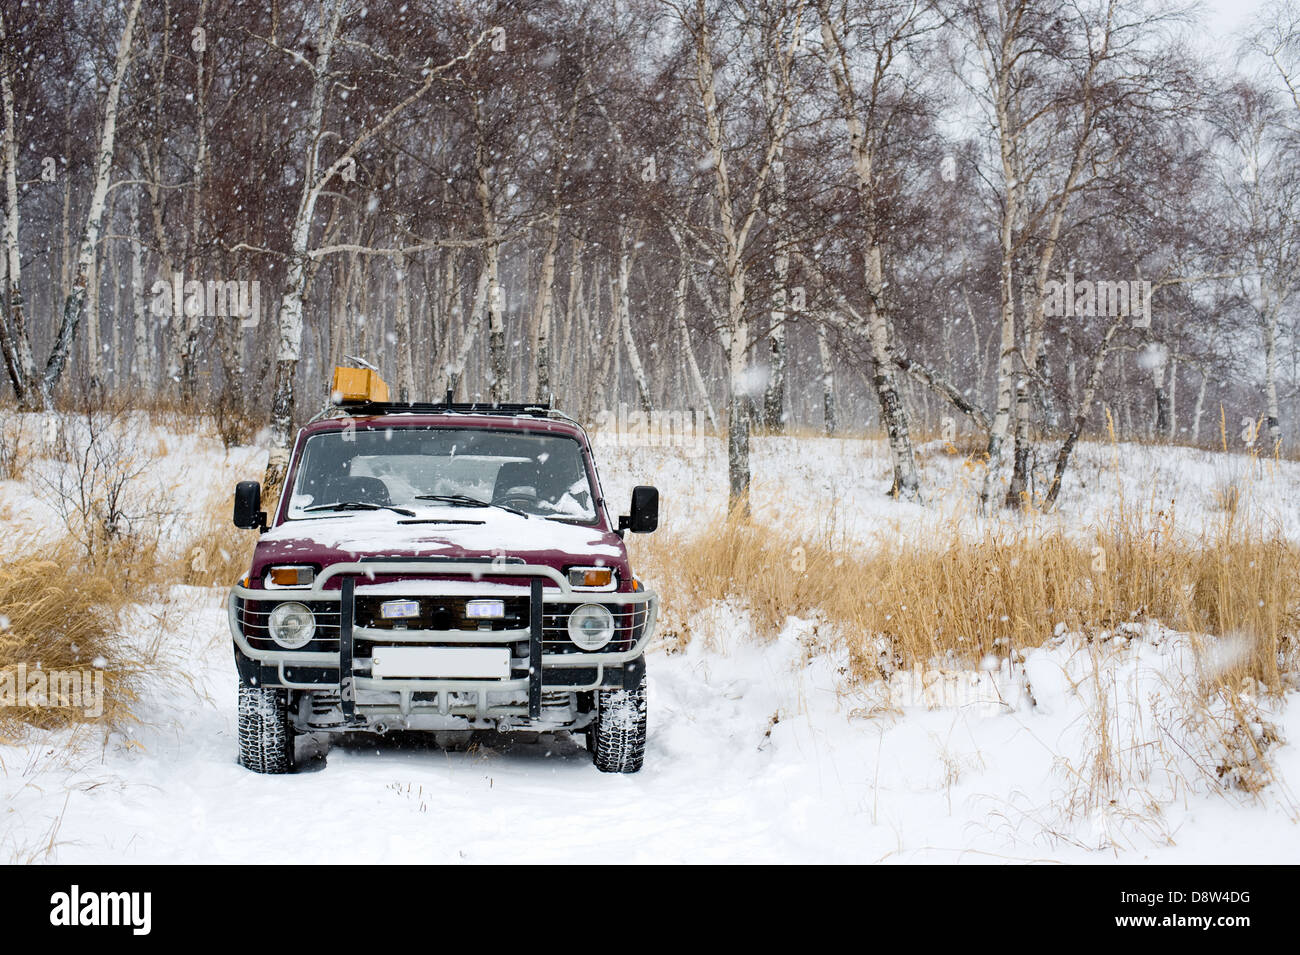 off-road vehicle in winter forest Stock Photo